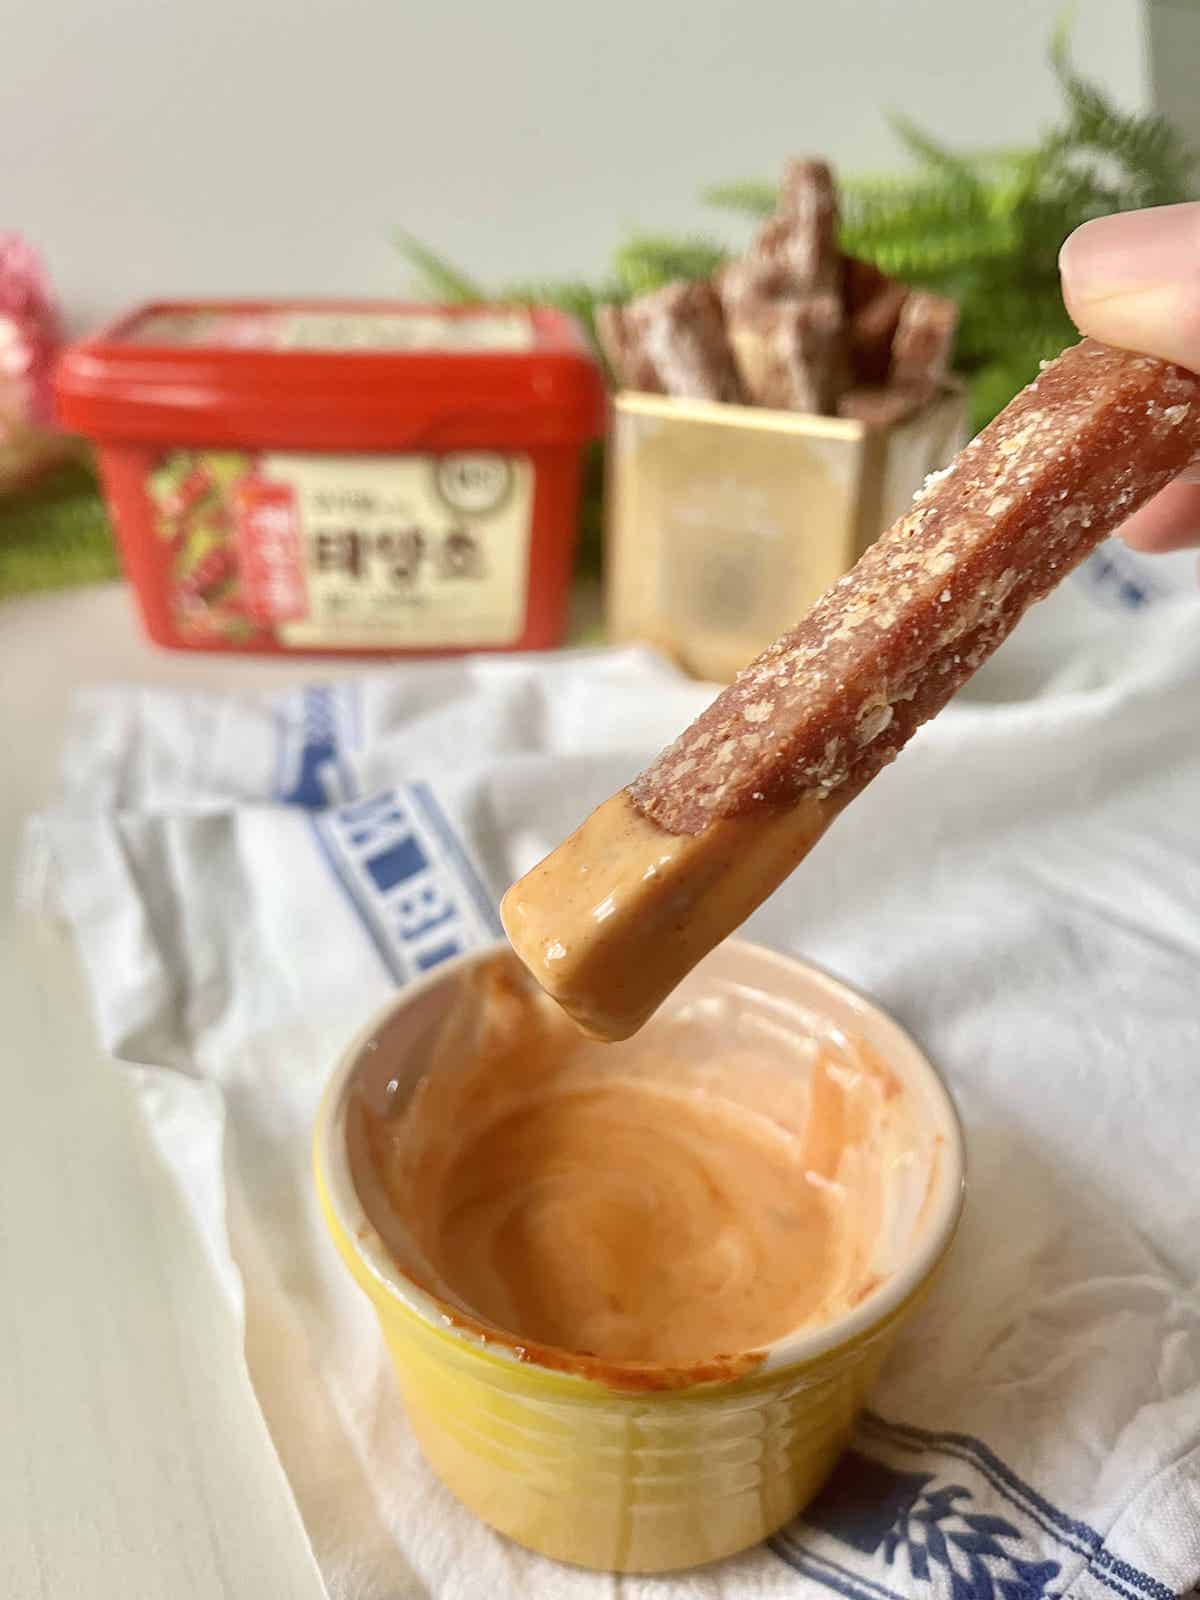 Dipping a SPAM fry into a bowl of Gochuajng Mayonnaise Sauce.